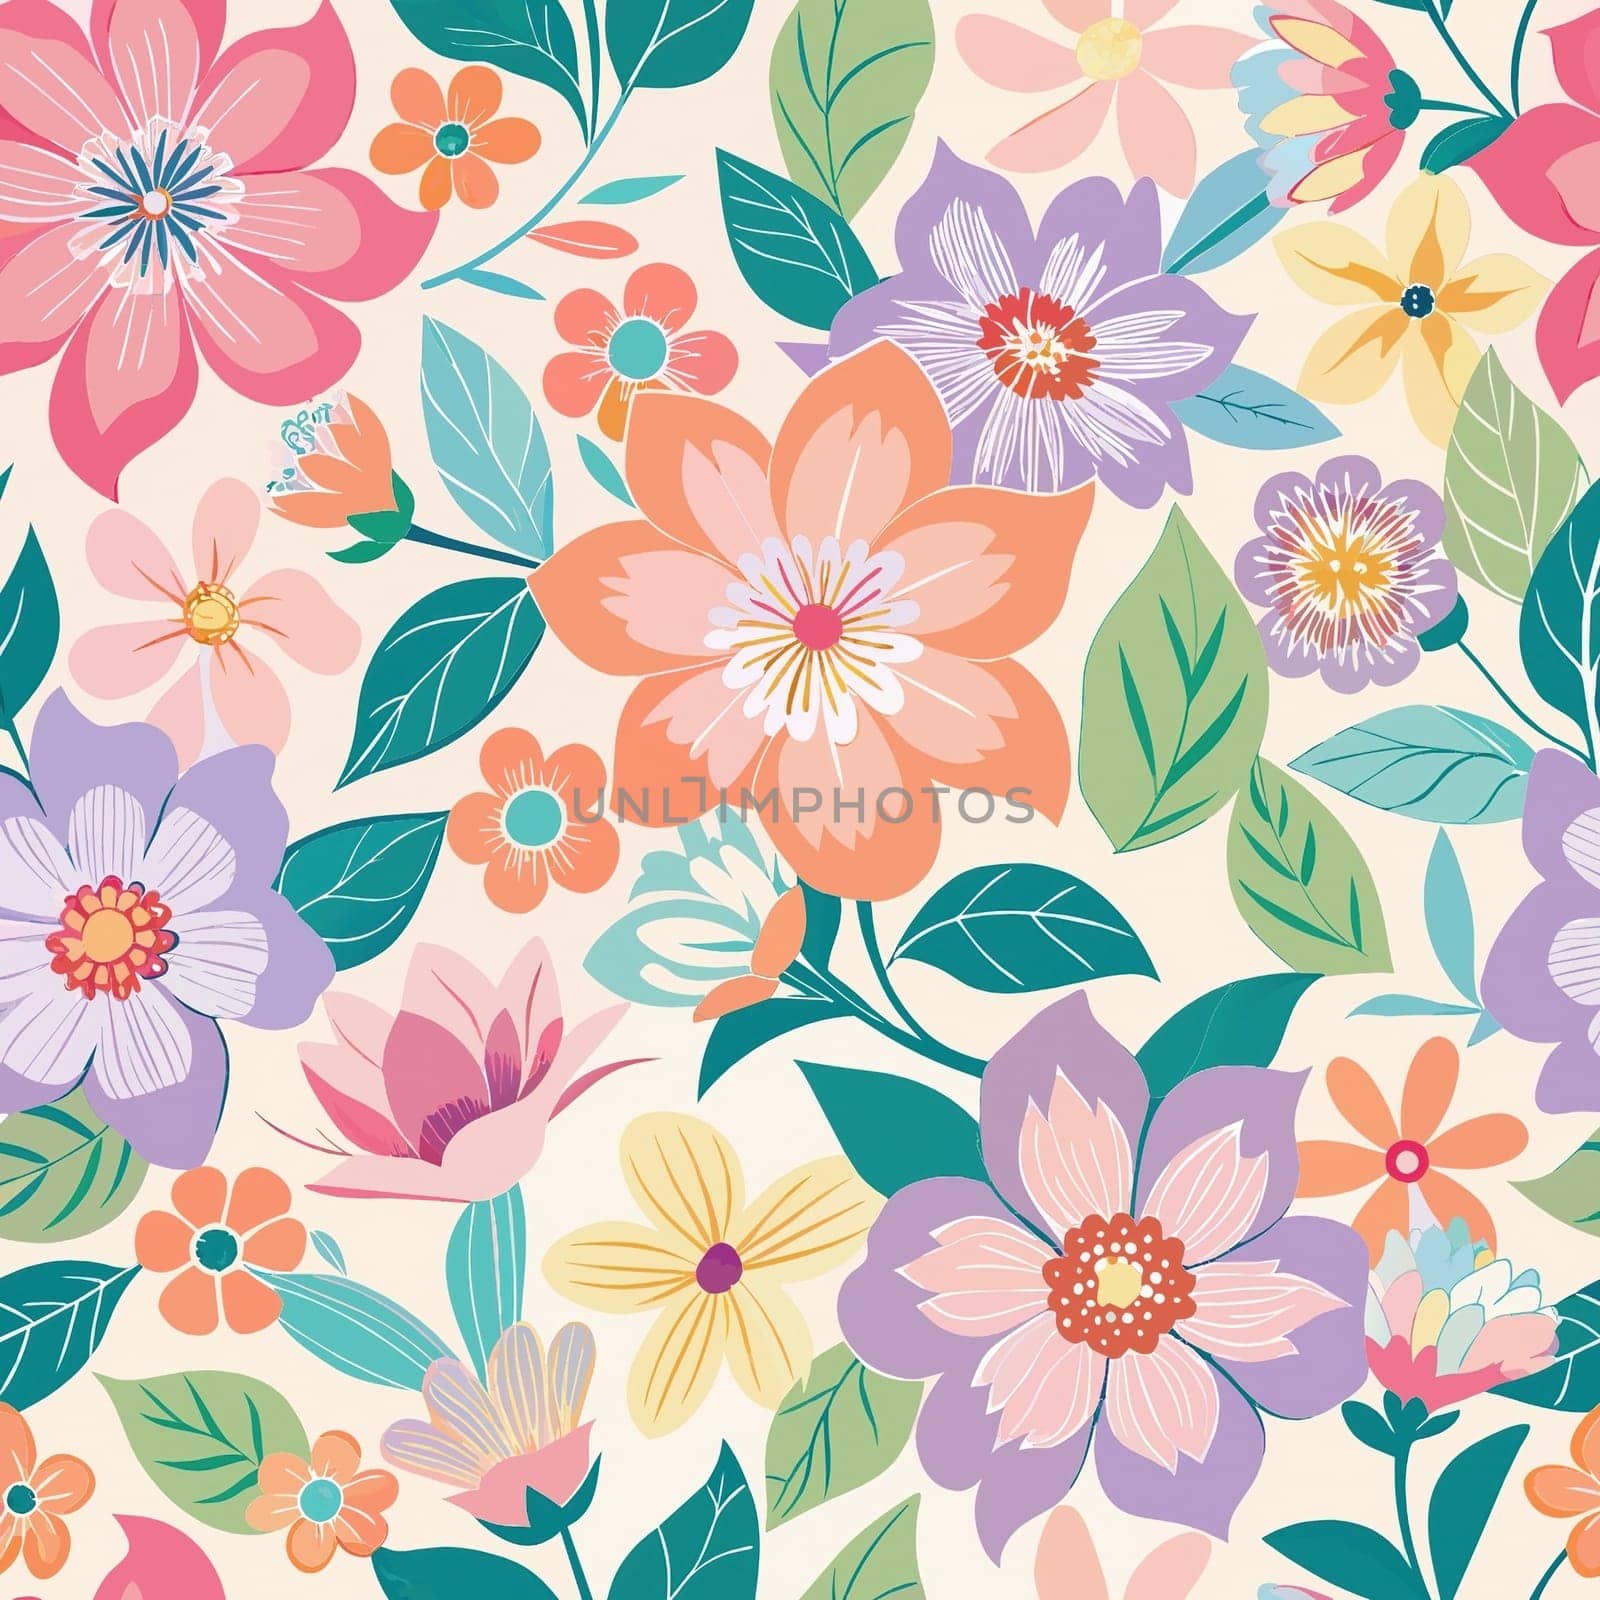 Floral seamless pattern with pink flowers and green leaves on blue background.Vector floral background with hand drawn flowers and leaves in pastel colors.Seamless pattern with flowers and leaves. Vector illustration in vintage style.floral card with flowers and leafs decoration vector illustration graphic design